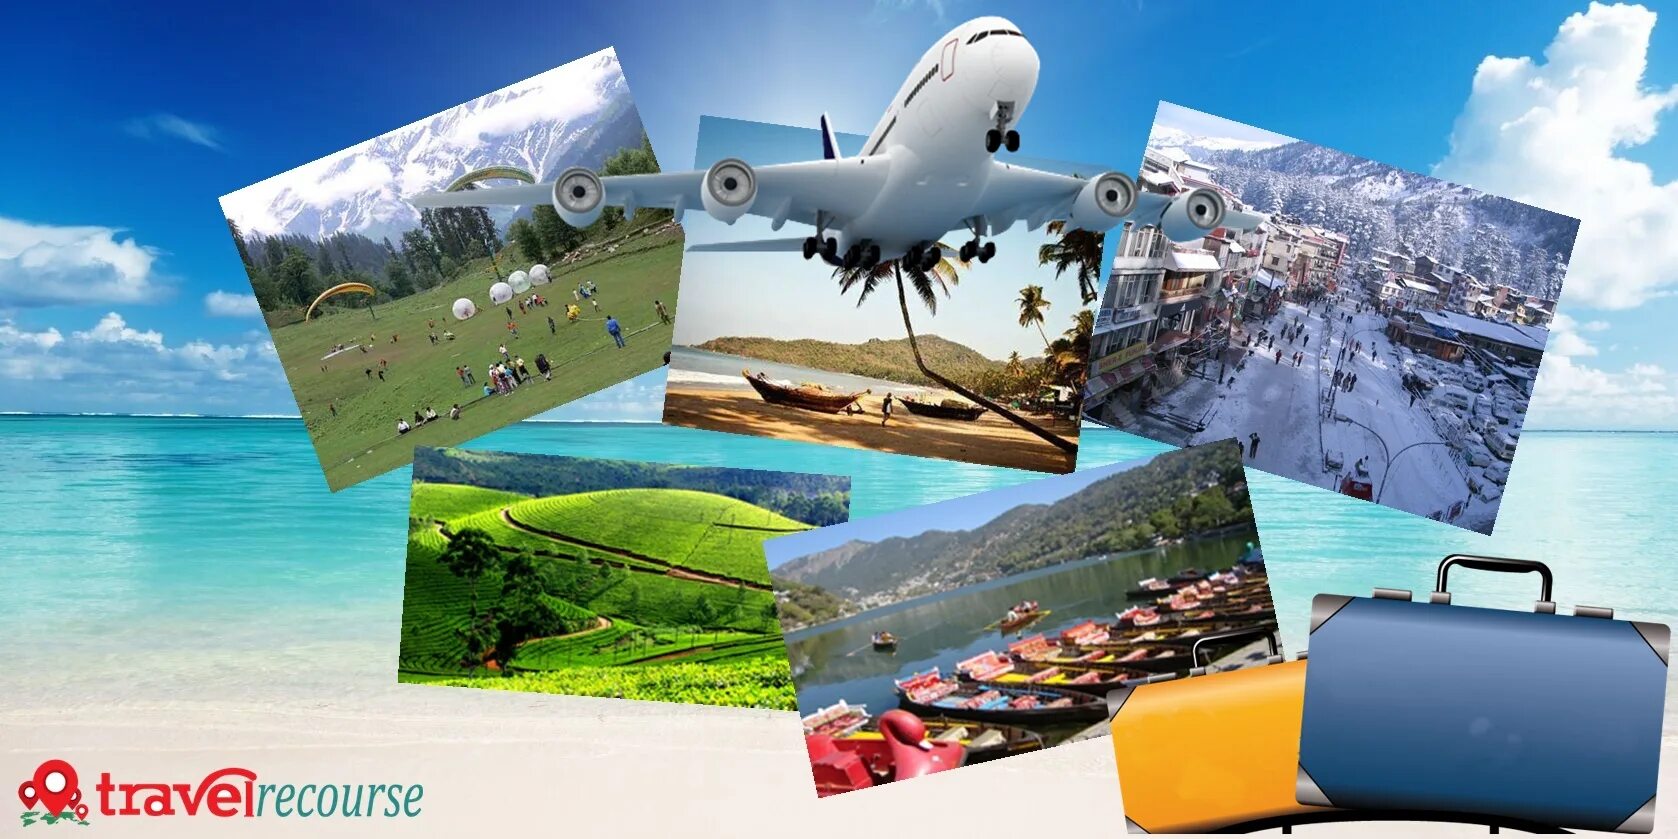 Travel package. Package Holiday. Travelling package. Travel agent package. Destination package